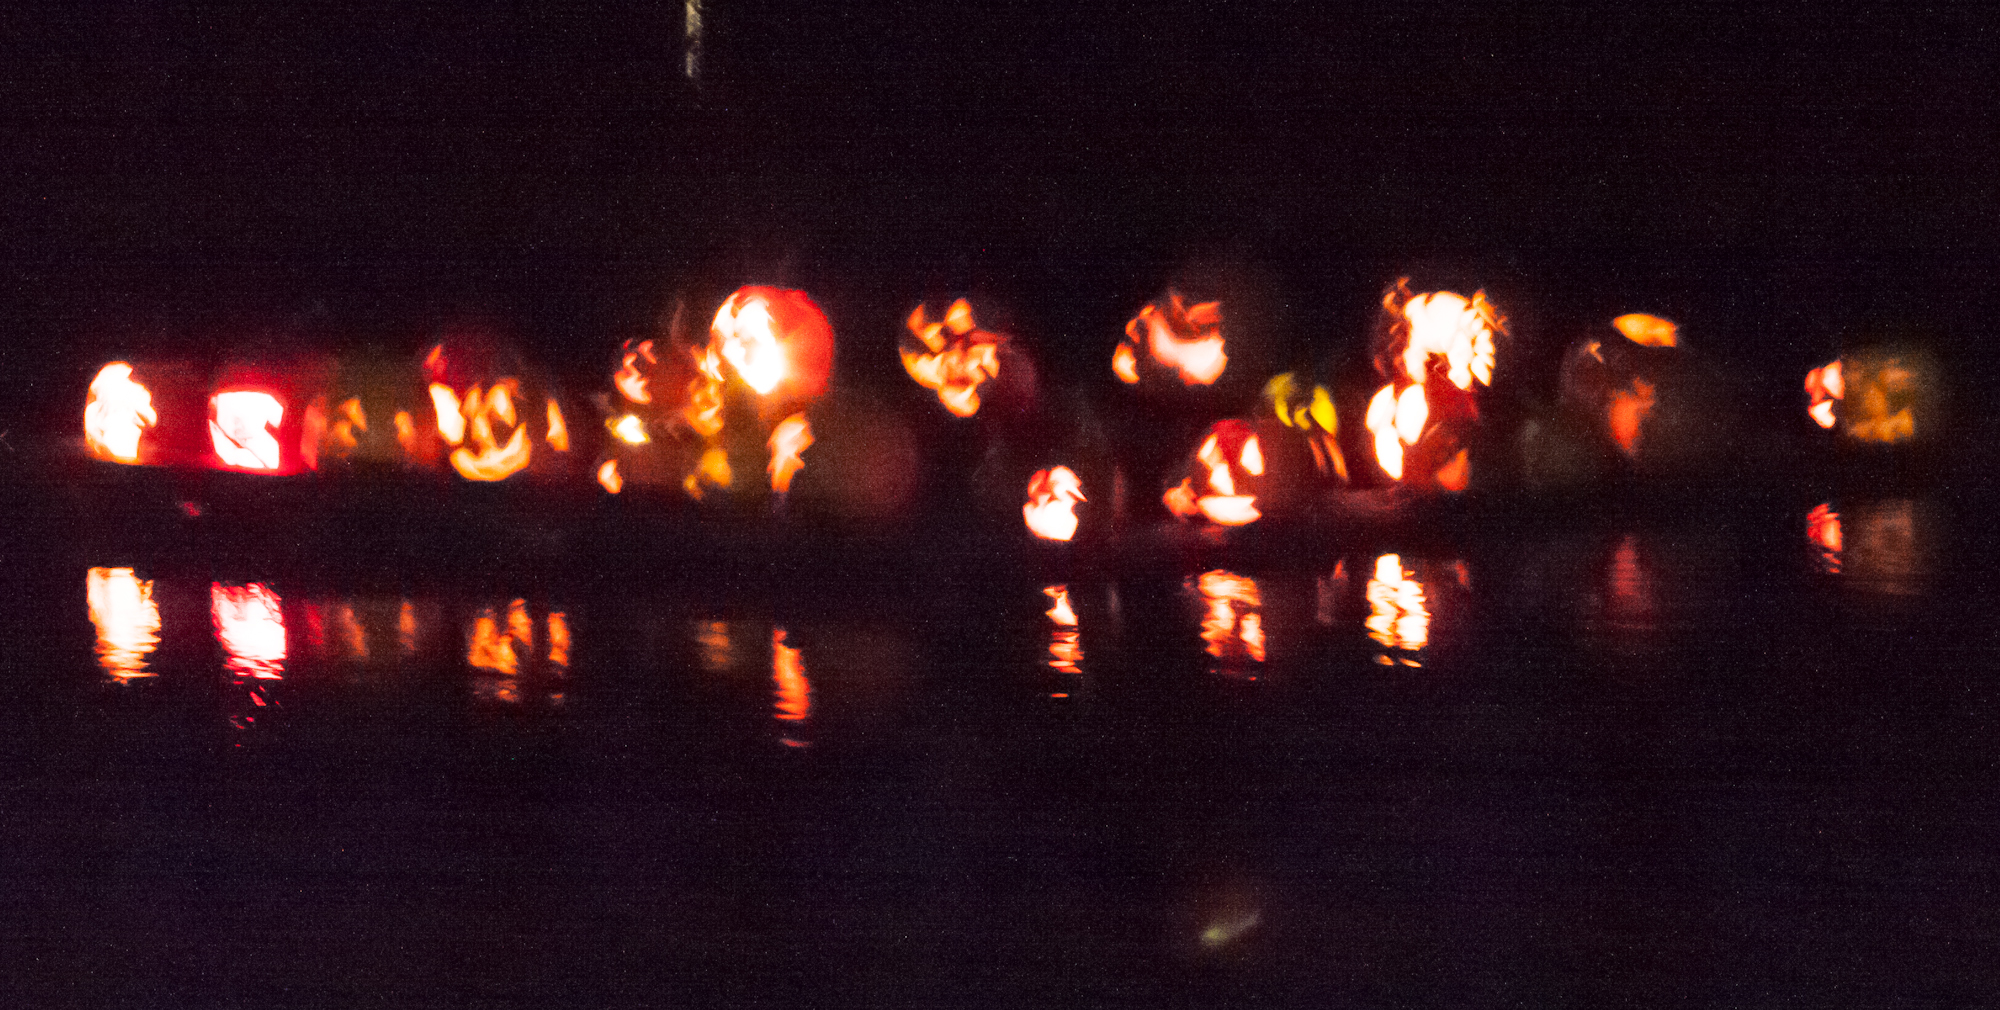 Lit jack-o-lanterns were sent adrift on the lake during the seventh annual Fall Festival and Pumpkin Float Saturday at the Parker Dam State Park.